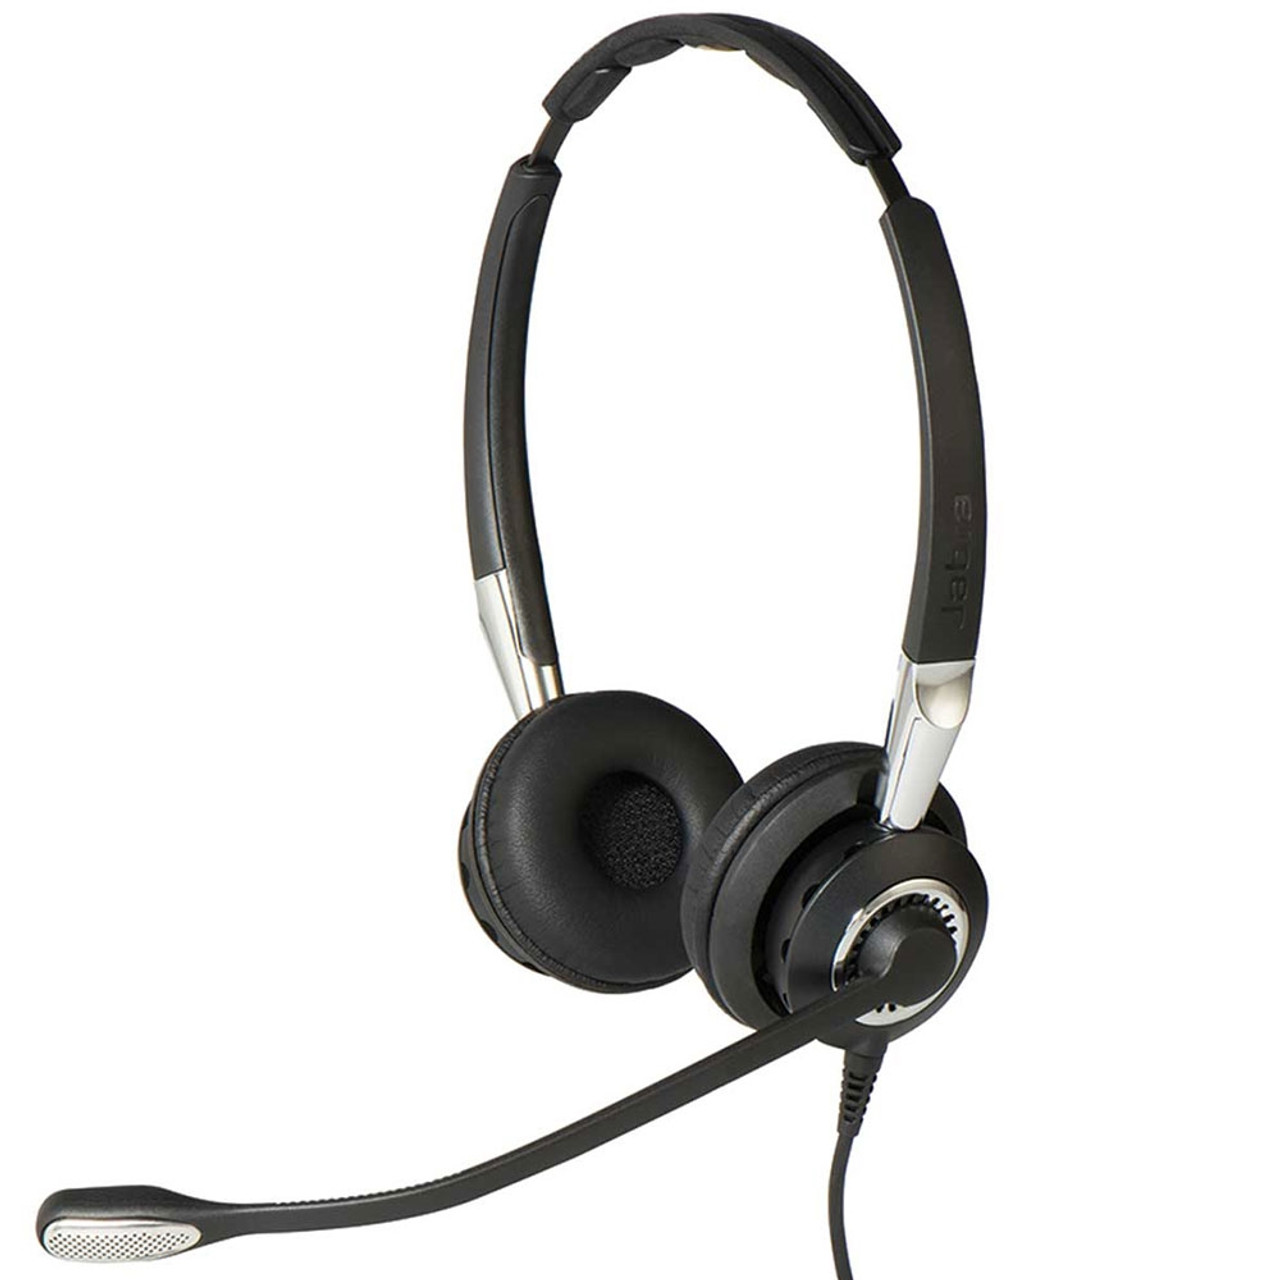 JA-2489-820-209 Choose high-quality audio, undisturbed calling and a pleasant wearing comfort. The BIZ 2400 II Duo is a stereo IP headset for desk phones, with wideband audio, Noise Canceling & Quick Disconnect.